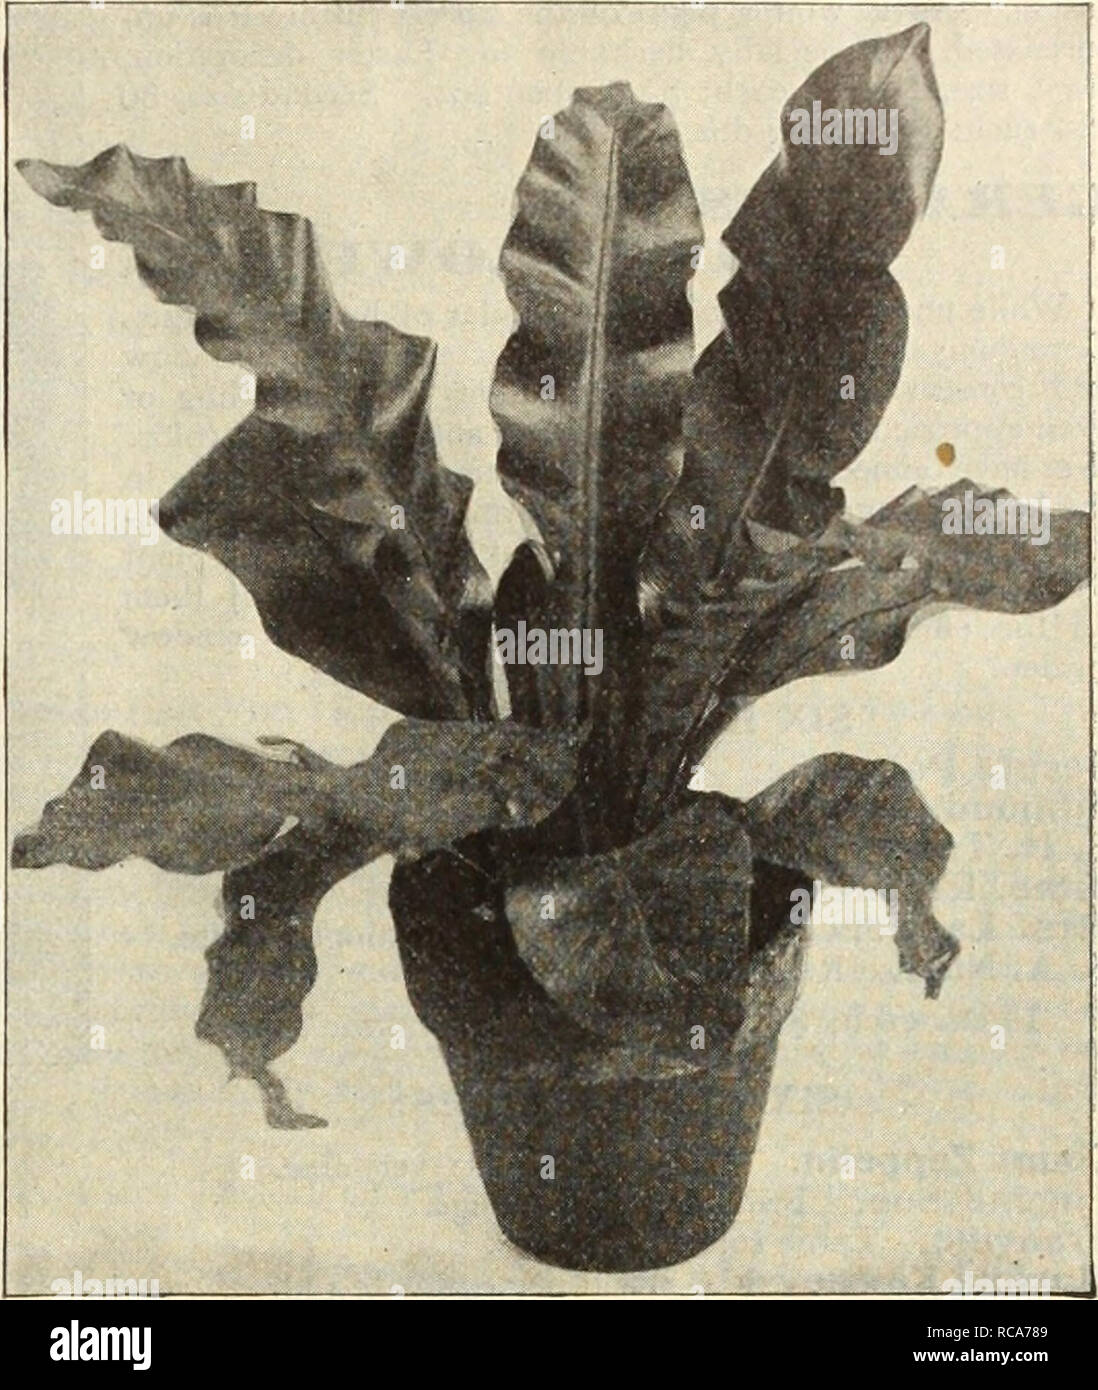 . Dreer's autumn catalogue, 1913. Horticultural products industry Catalogs; Nurseries (Horticulture) Catalogs; Nursery stock Catalogs; Plants, Ornamental Catalogs; Flowers Catalogs. Cyrtomium Rcchfohdi'Sum. (New Crested Holly Fern). 'Asplenium Nidus Avis (Birds' Nest Fern). Nephrolepls Bostoniensis (The Boston, Sword Fern)' This is the original Boston Fern, which for years has been the most popular house plant in cultivation. Specimens in 6-inch pots, 75 cts. each; large specimens, $2.50 each. Nephrolepis Scholzeli (The Plumed Dwarf Boston, Fern ). A sport from Scotti, which has all the desira Stock Photo